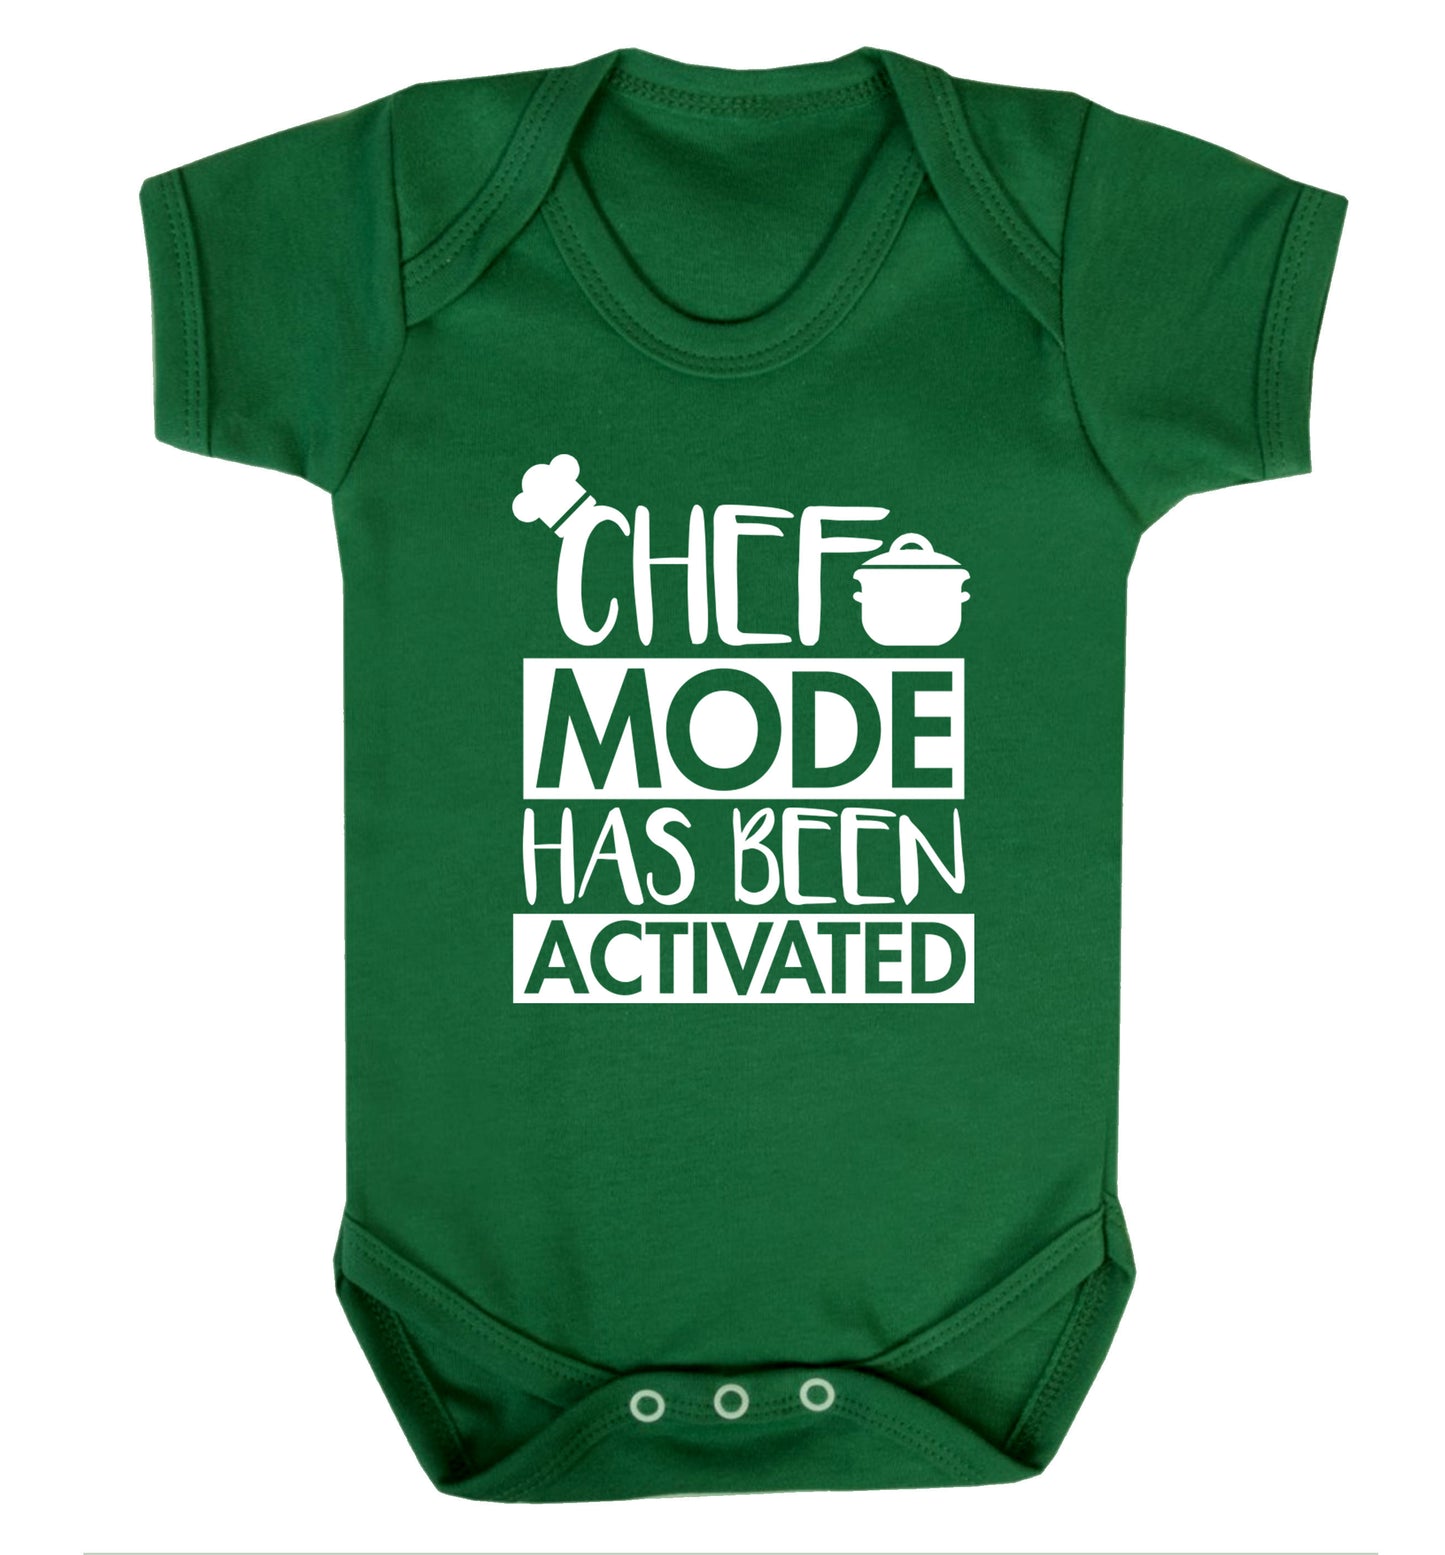 Chef mode has been activated Baby Vest green 18-24 months